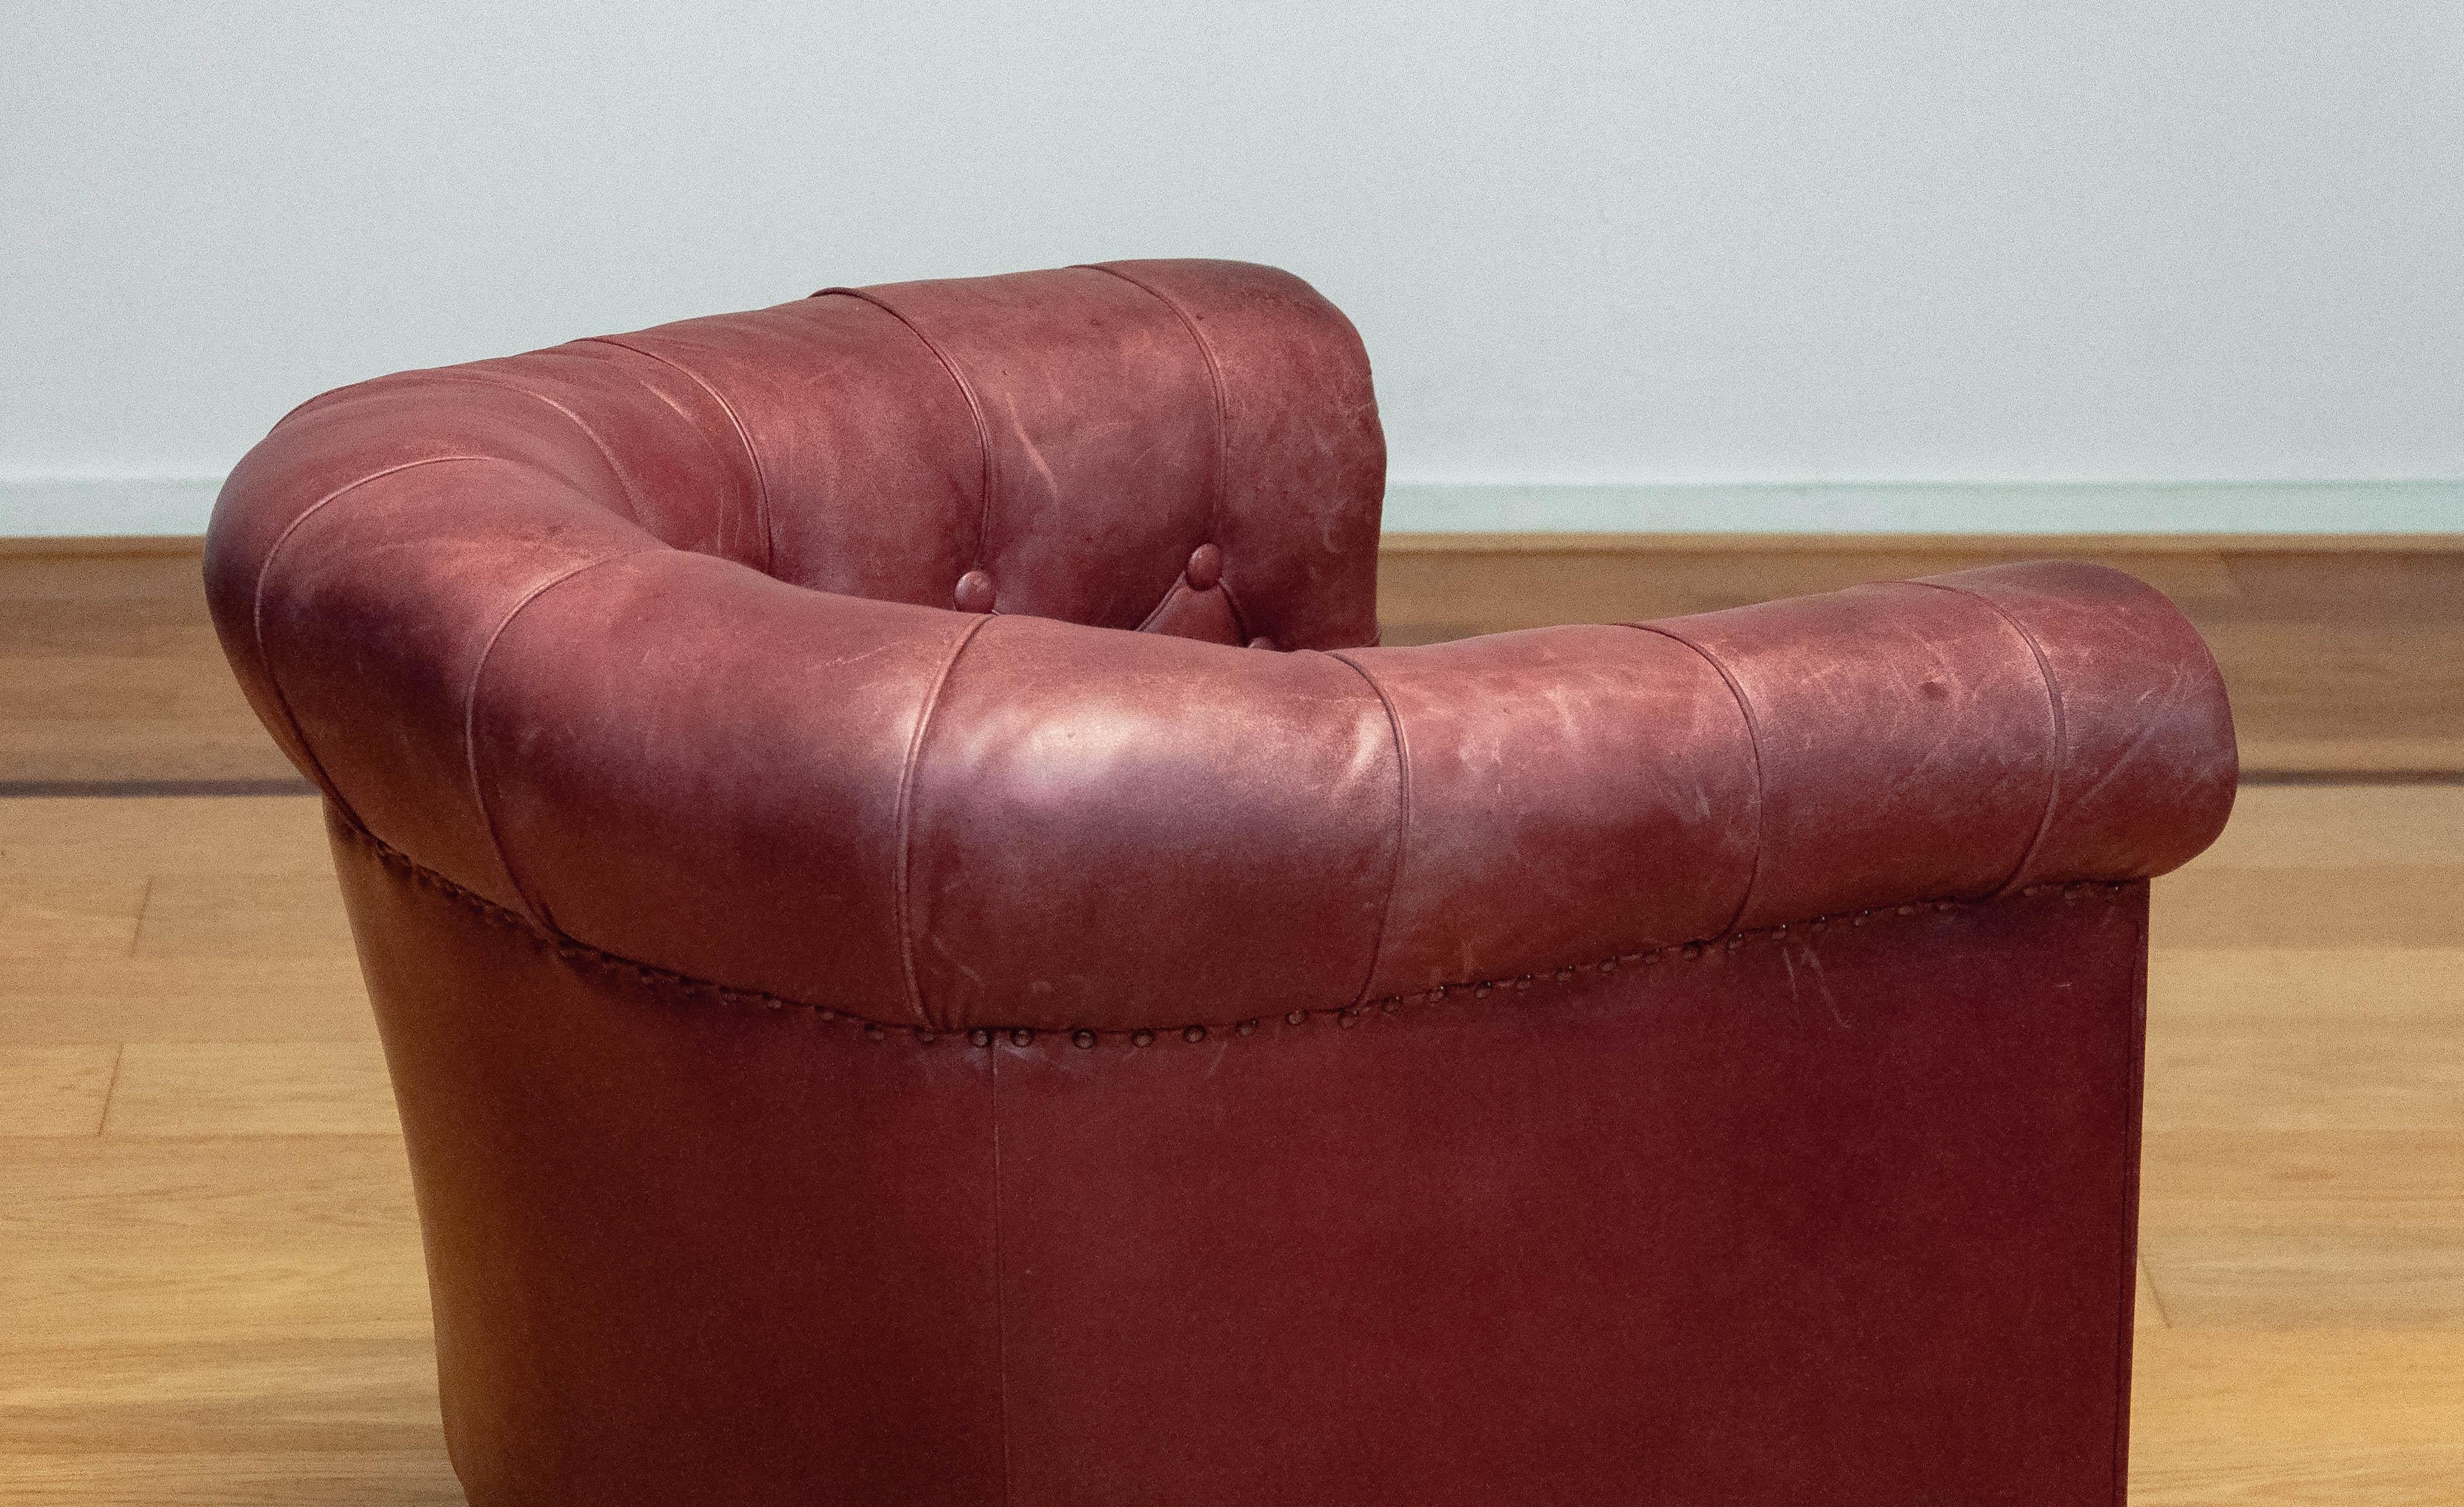 1930s Swedish Crimson Red Chesterfield Club / Lounge Chair in Patinated Leather For Sale 2